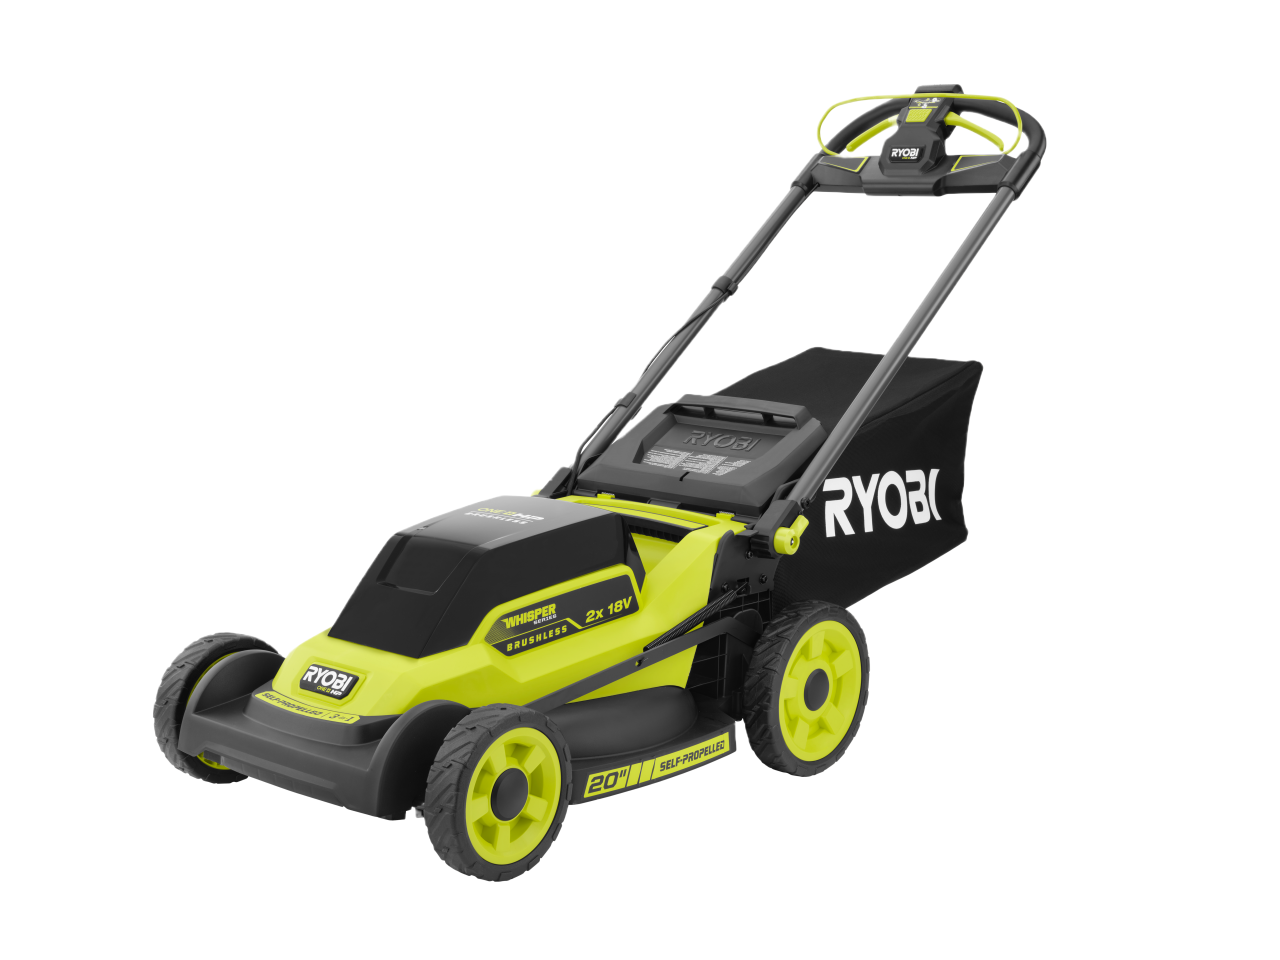 PowerToolsLineImage for Product category Mowers.